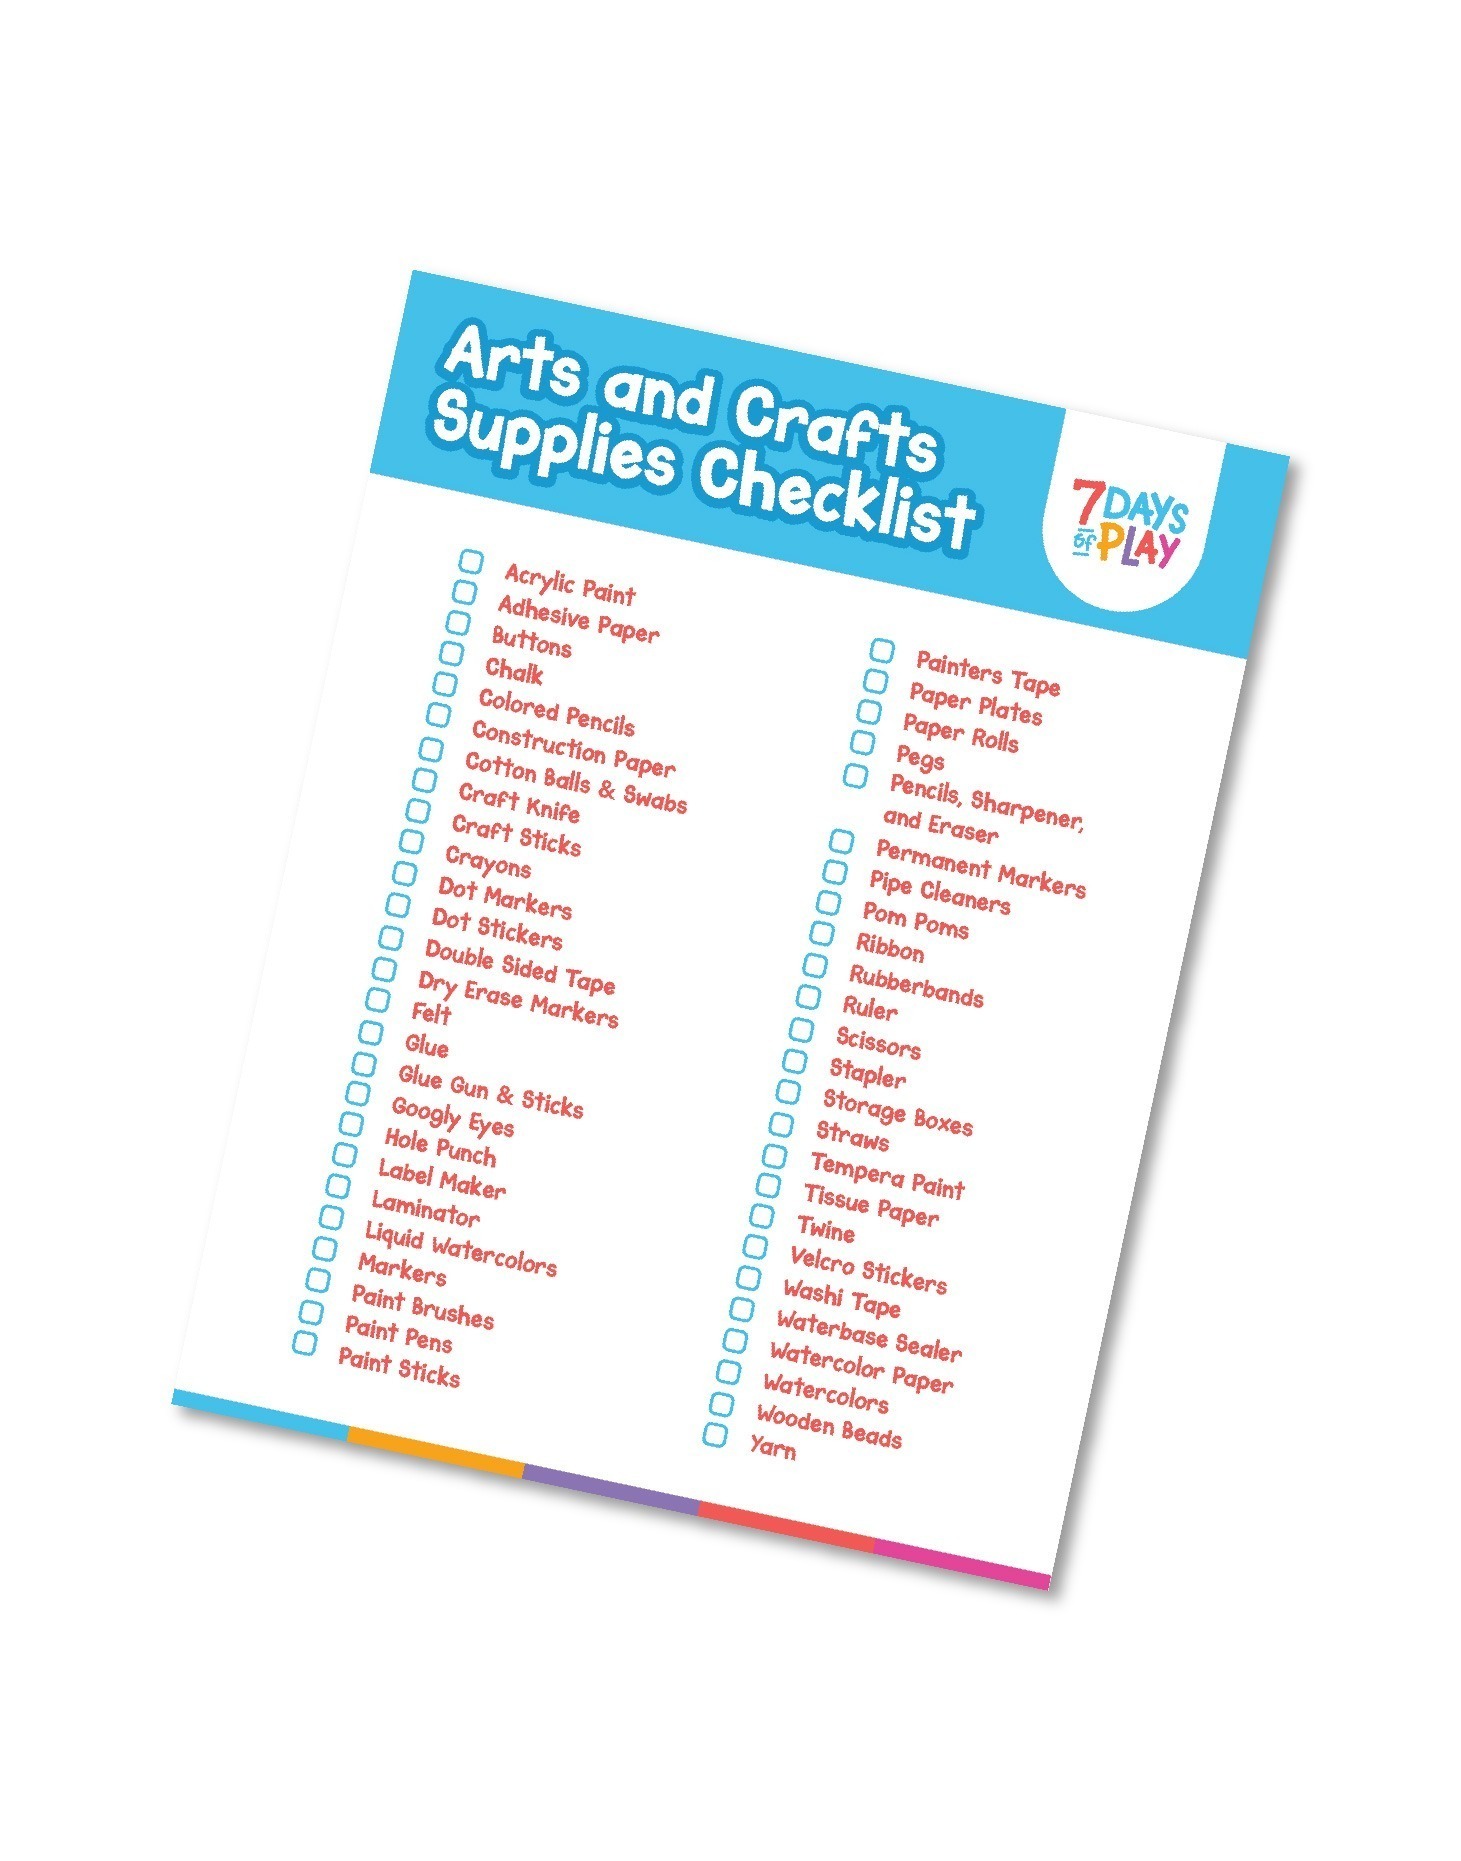 The Best Art Supplies for Kids (with a downloadable checklist